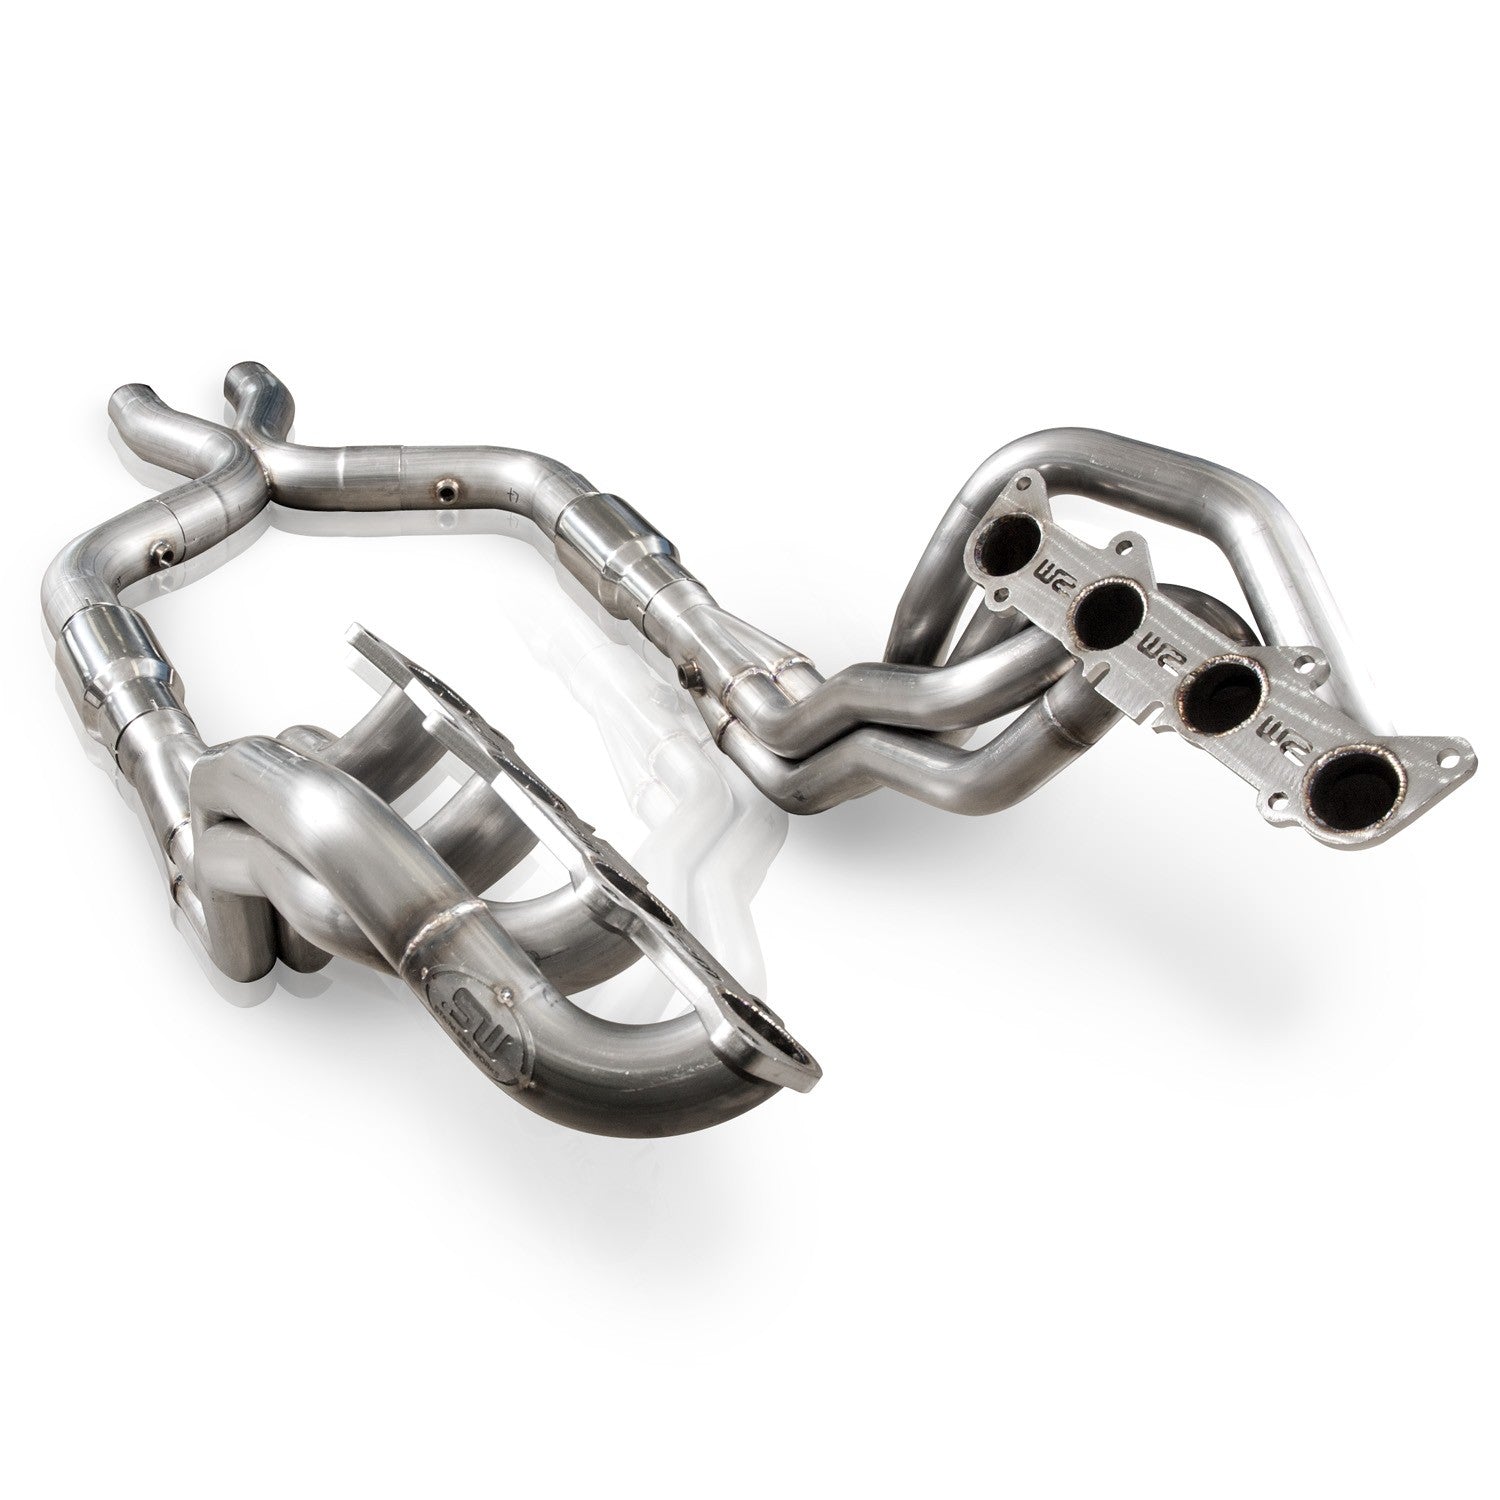 Stainless Works Ford Mustang GT 2011-14 Headers: 1-7/8" with Catted X-Pipe M11HDRCATX